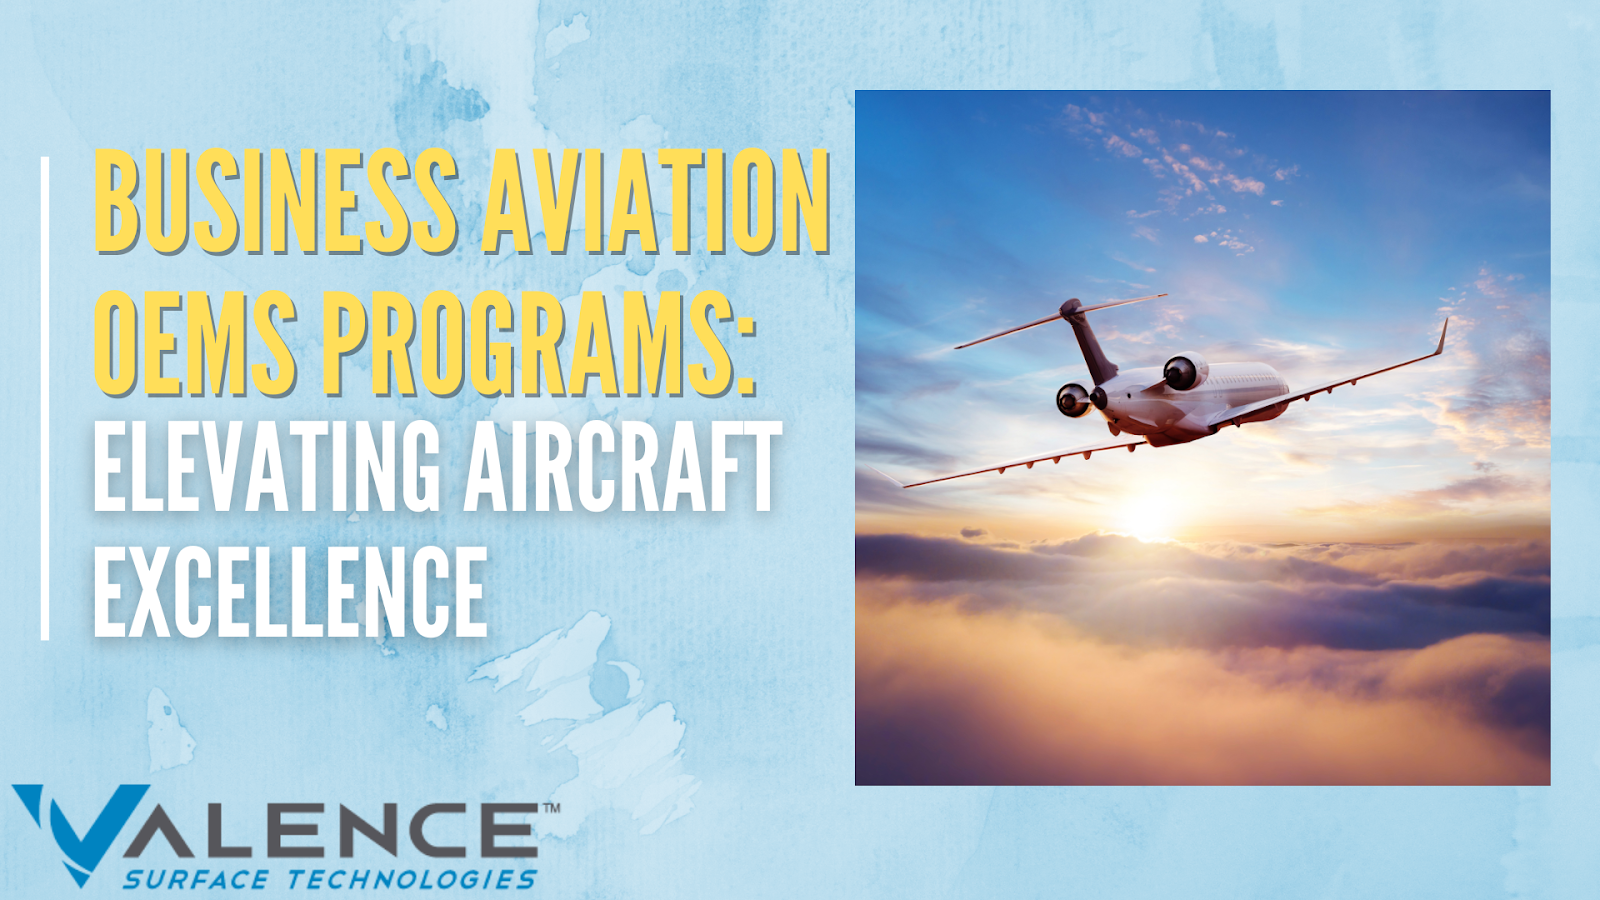 Elevating Aircraft Excellence<br />
